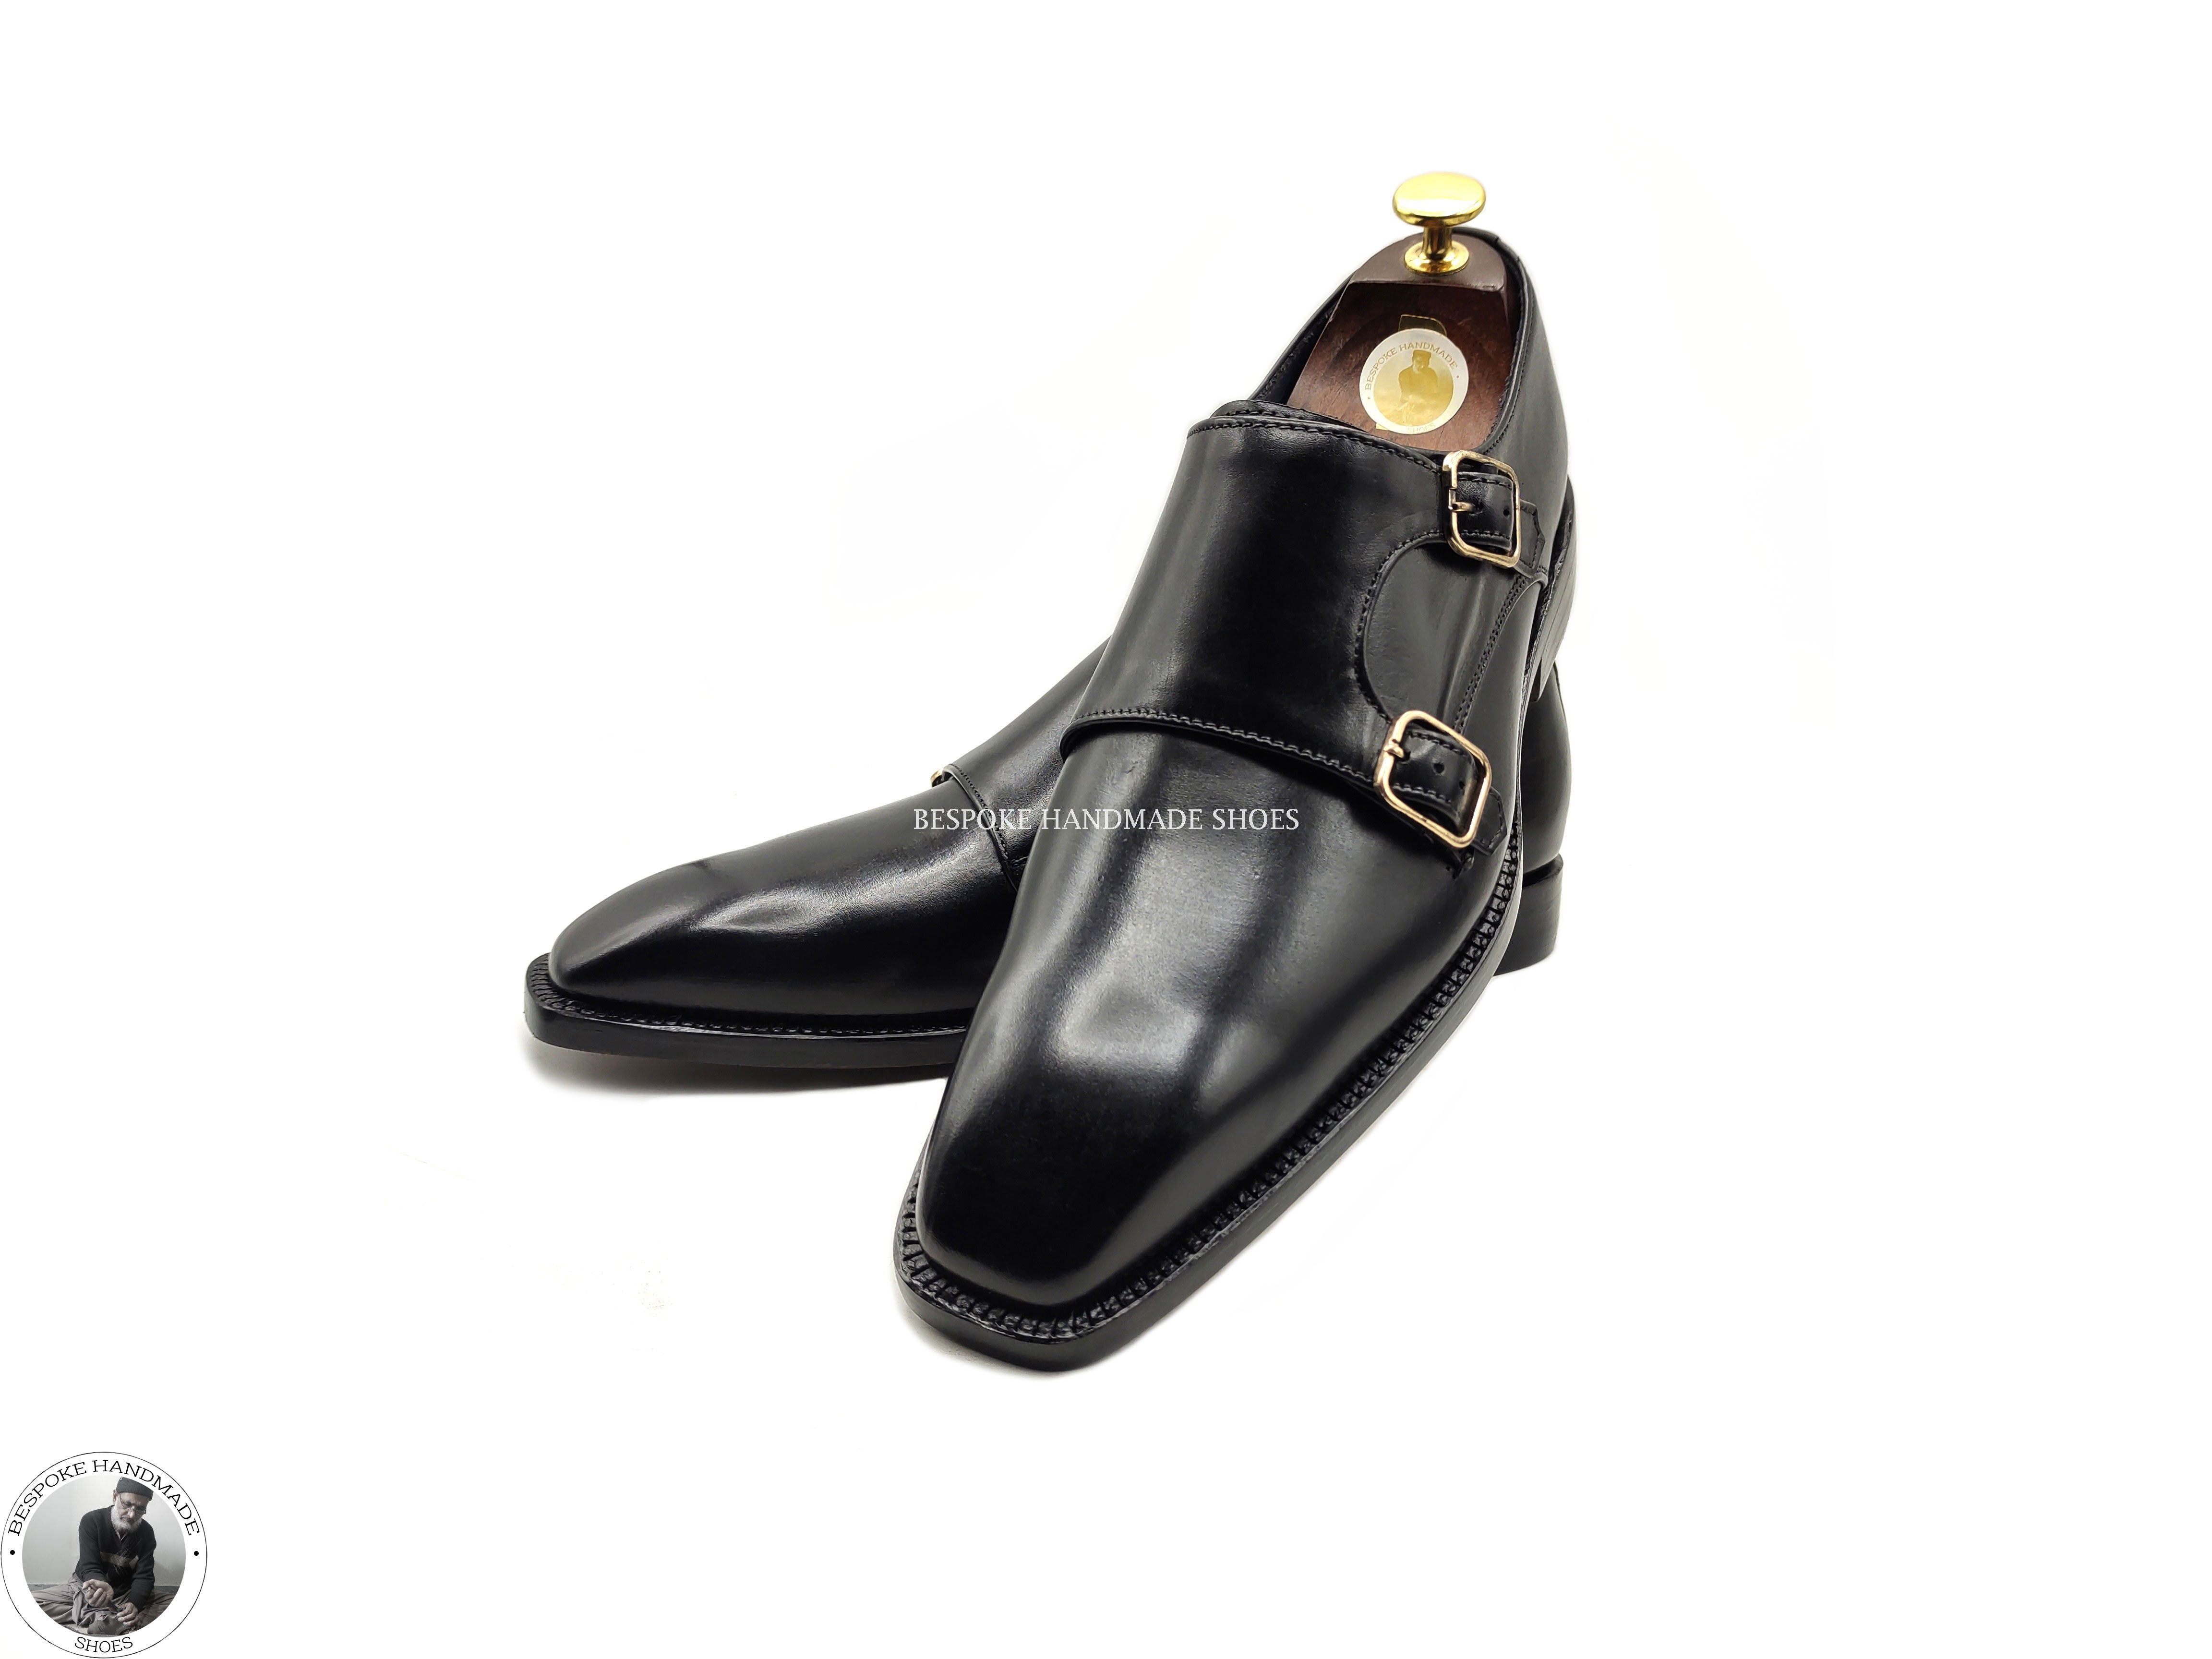 Handmade Bespoke Genuine Black Leather Double Monk Strap Wholecut Casual Shoes For Men'sHandmade Bespoke Genuine Black Leather Double Monk Strap Wholecut Casual Shoes For Men's